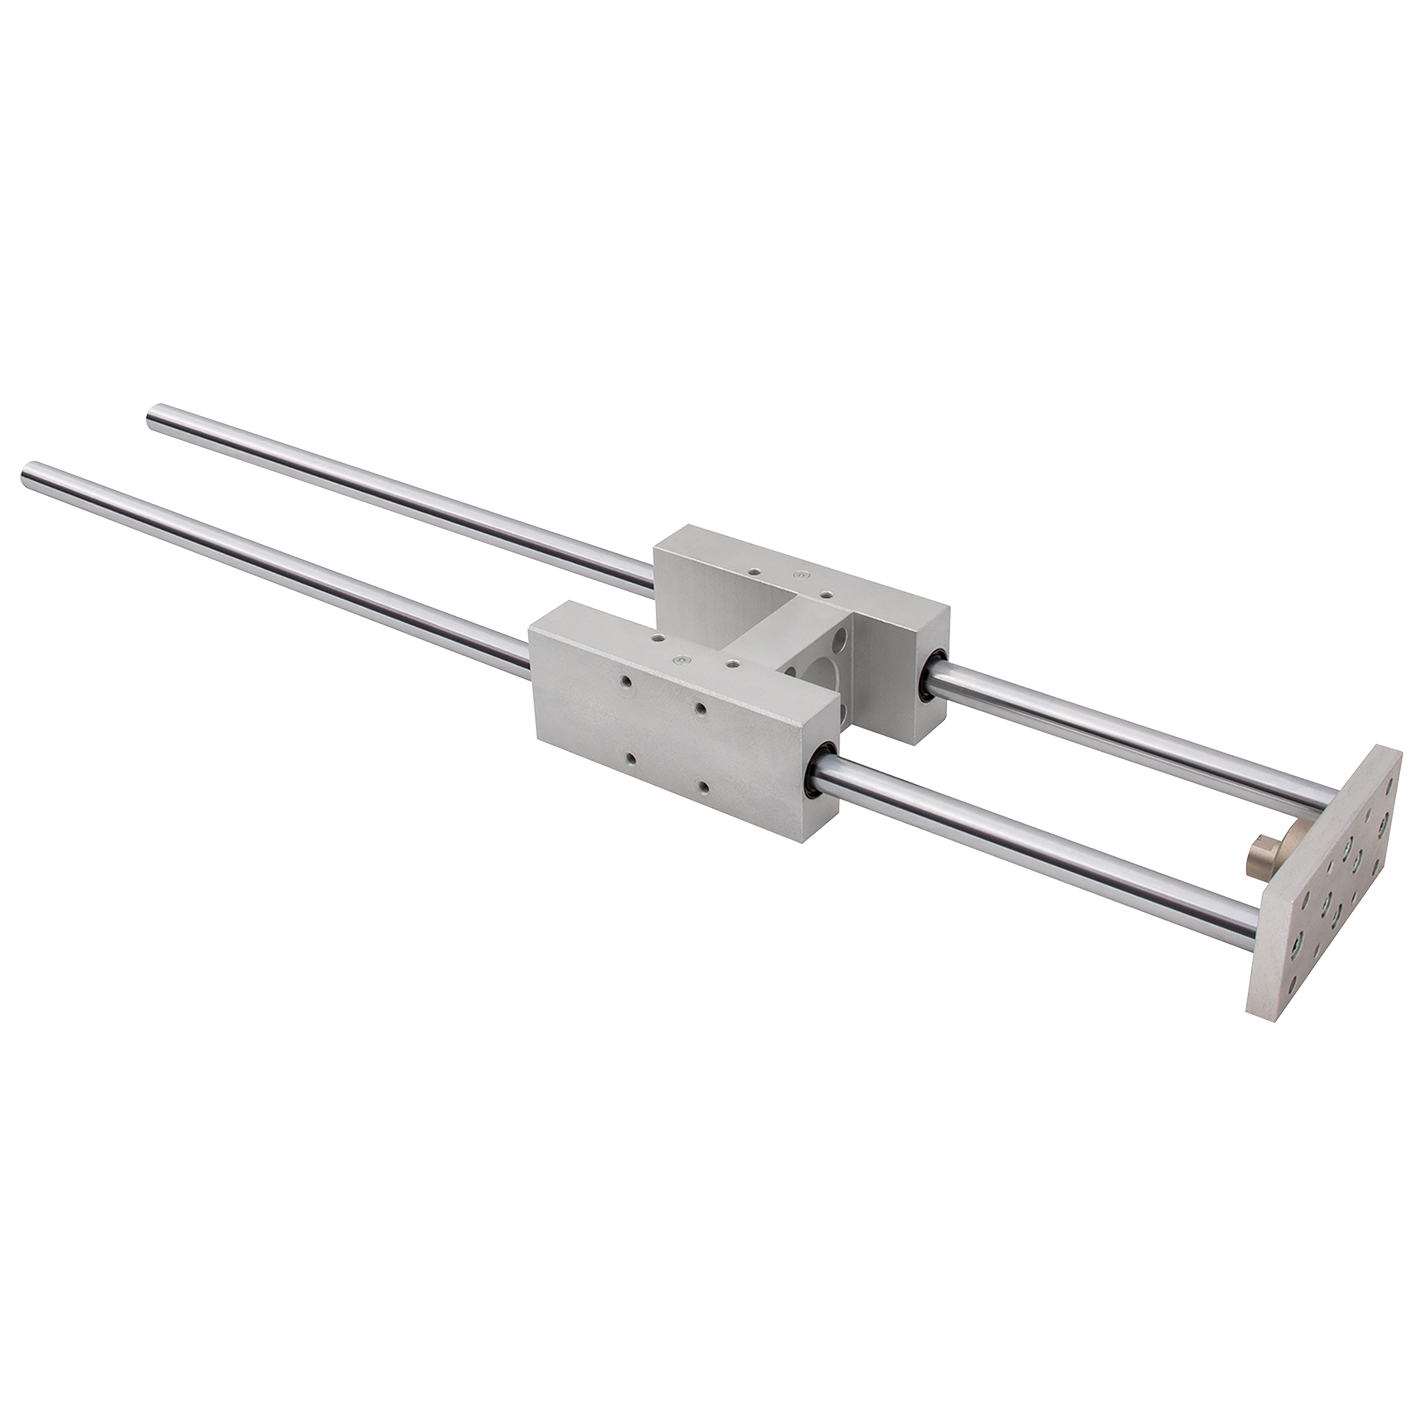 40mm Bore x 100mm Stroke Cylinder Guide Unit